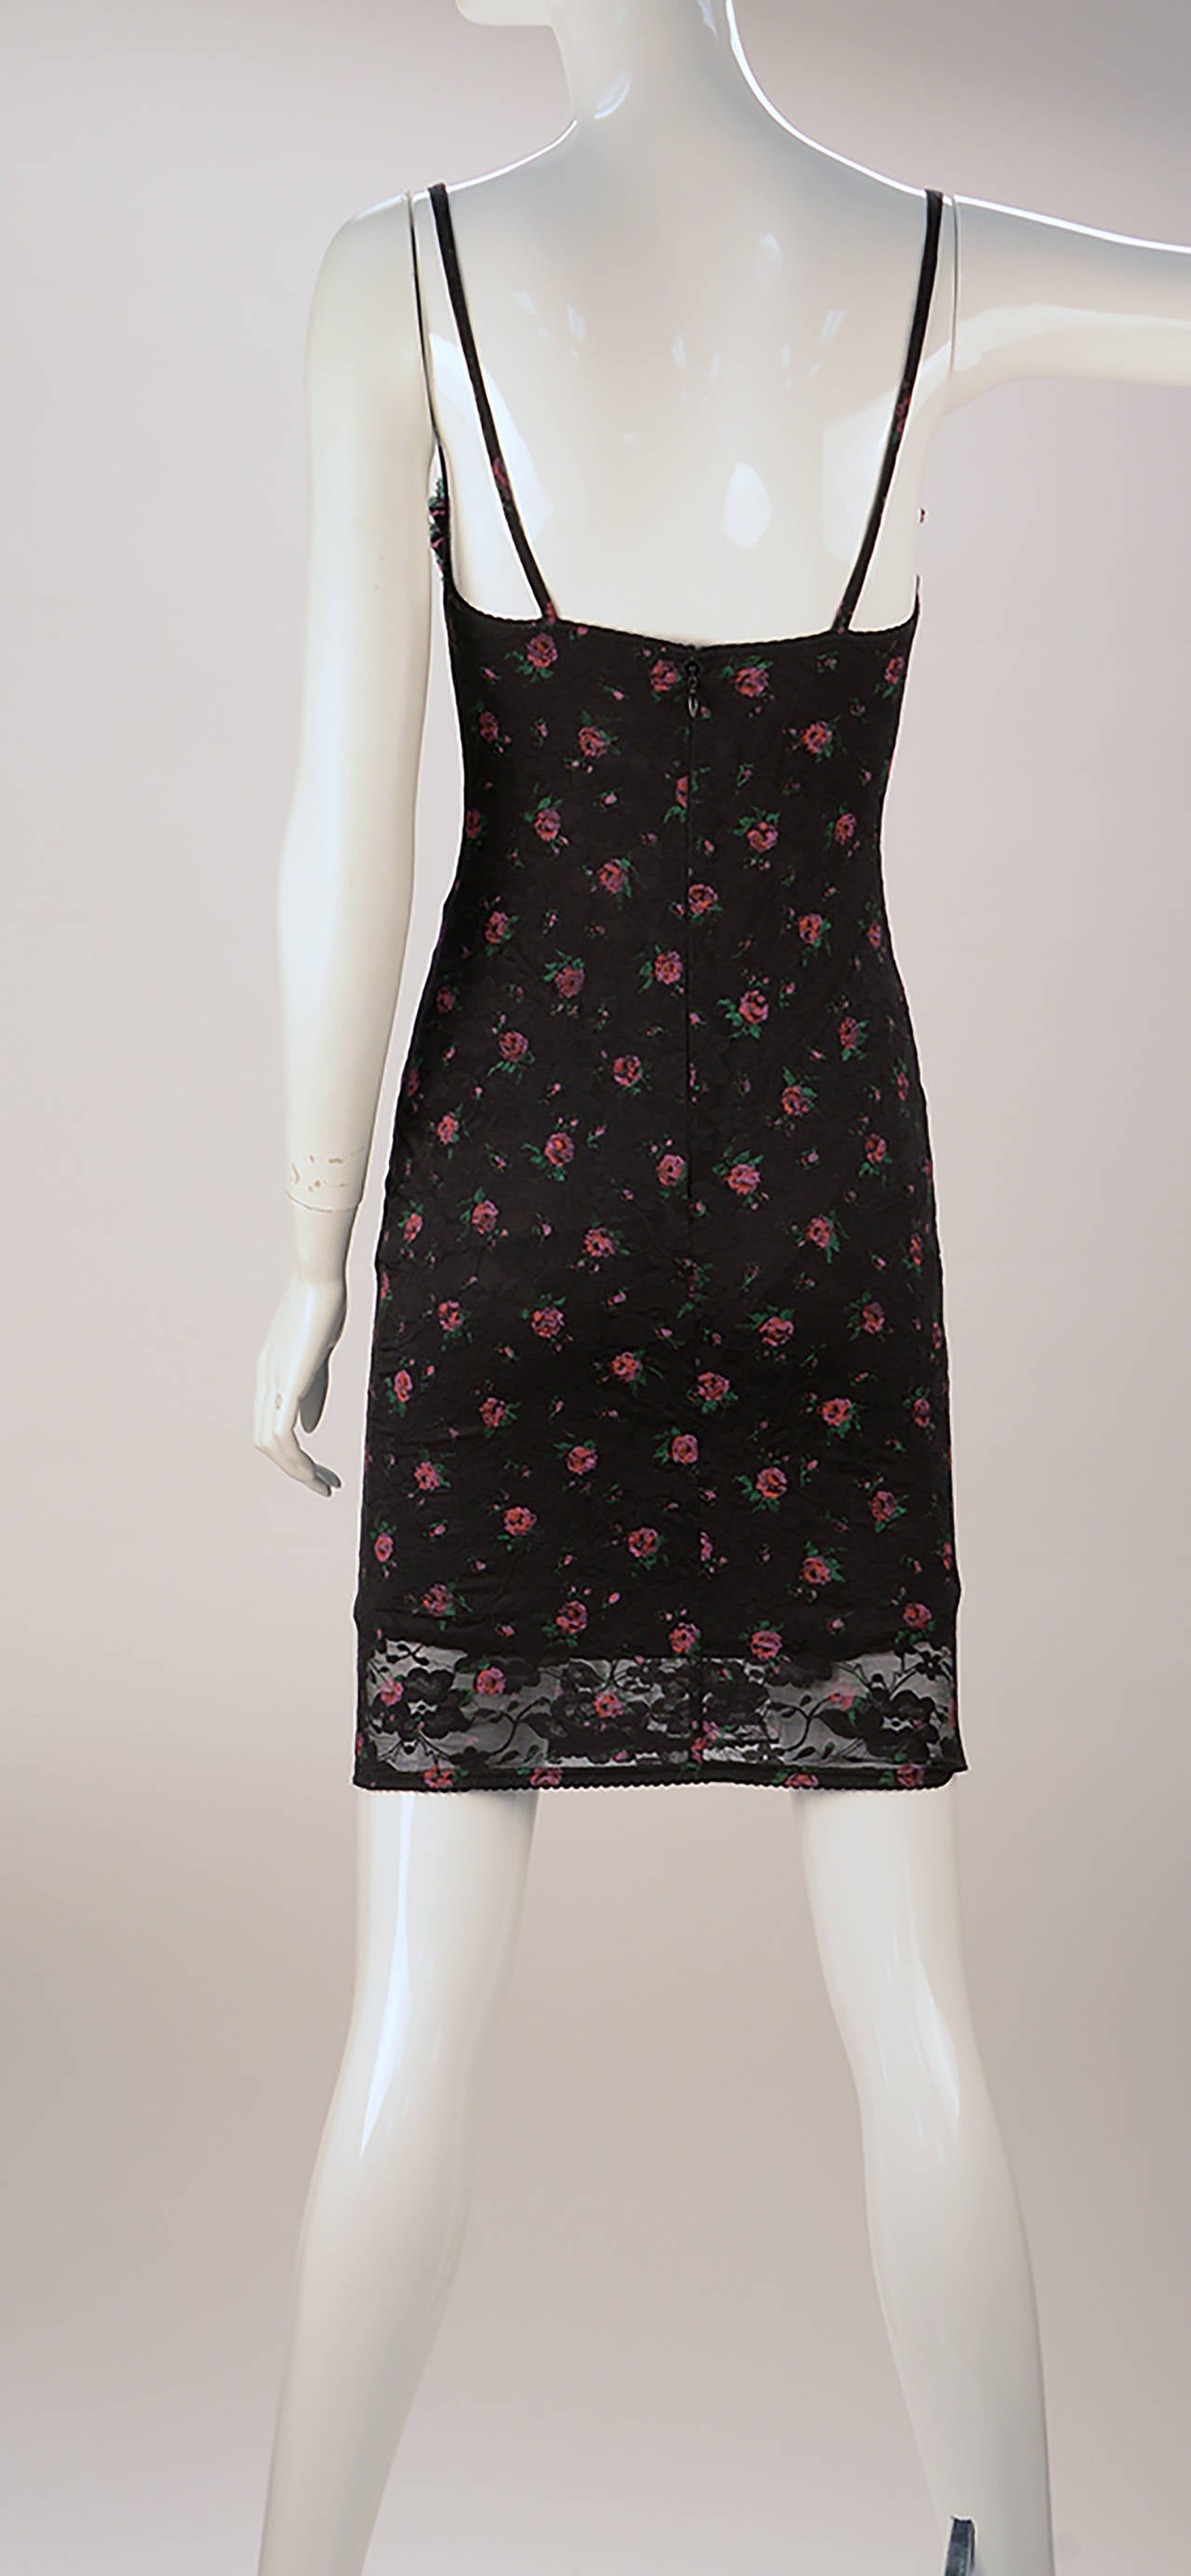 Parisian Duo Yvan & Marzia creates this sexy and sweet number! The Spanish styled body-con stretch knit dress has a floral motif print throughout. Ruffles at bust with underwire support. Lined with black stretch knit. Zip at back.

Usa Moderns size